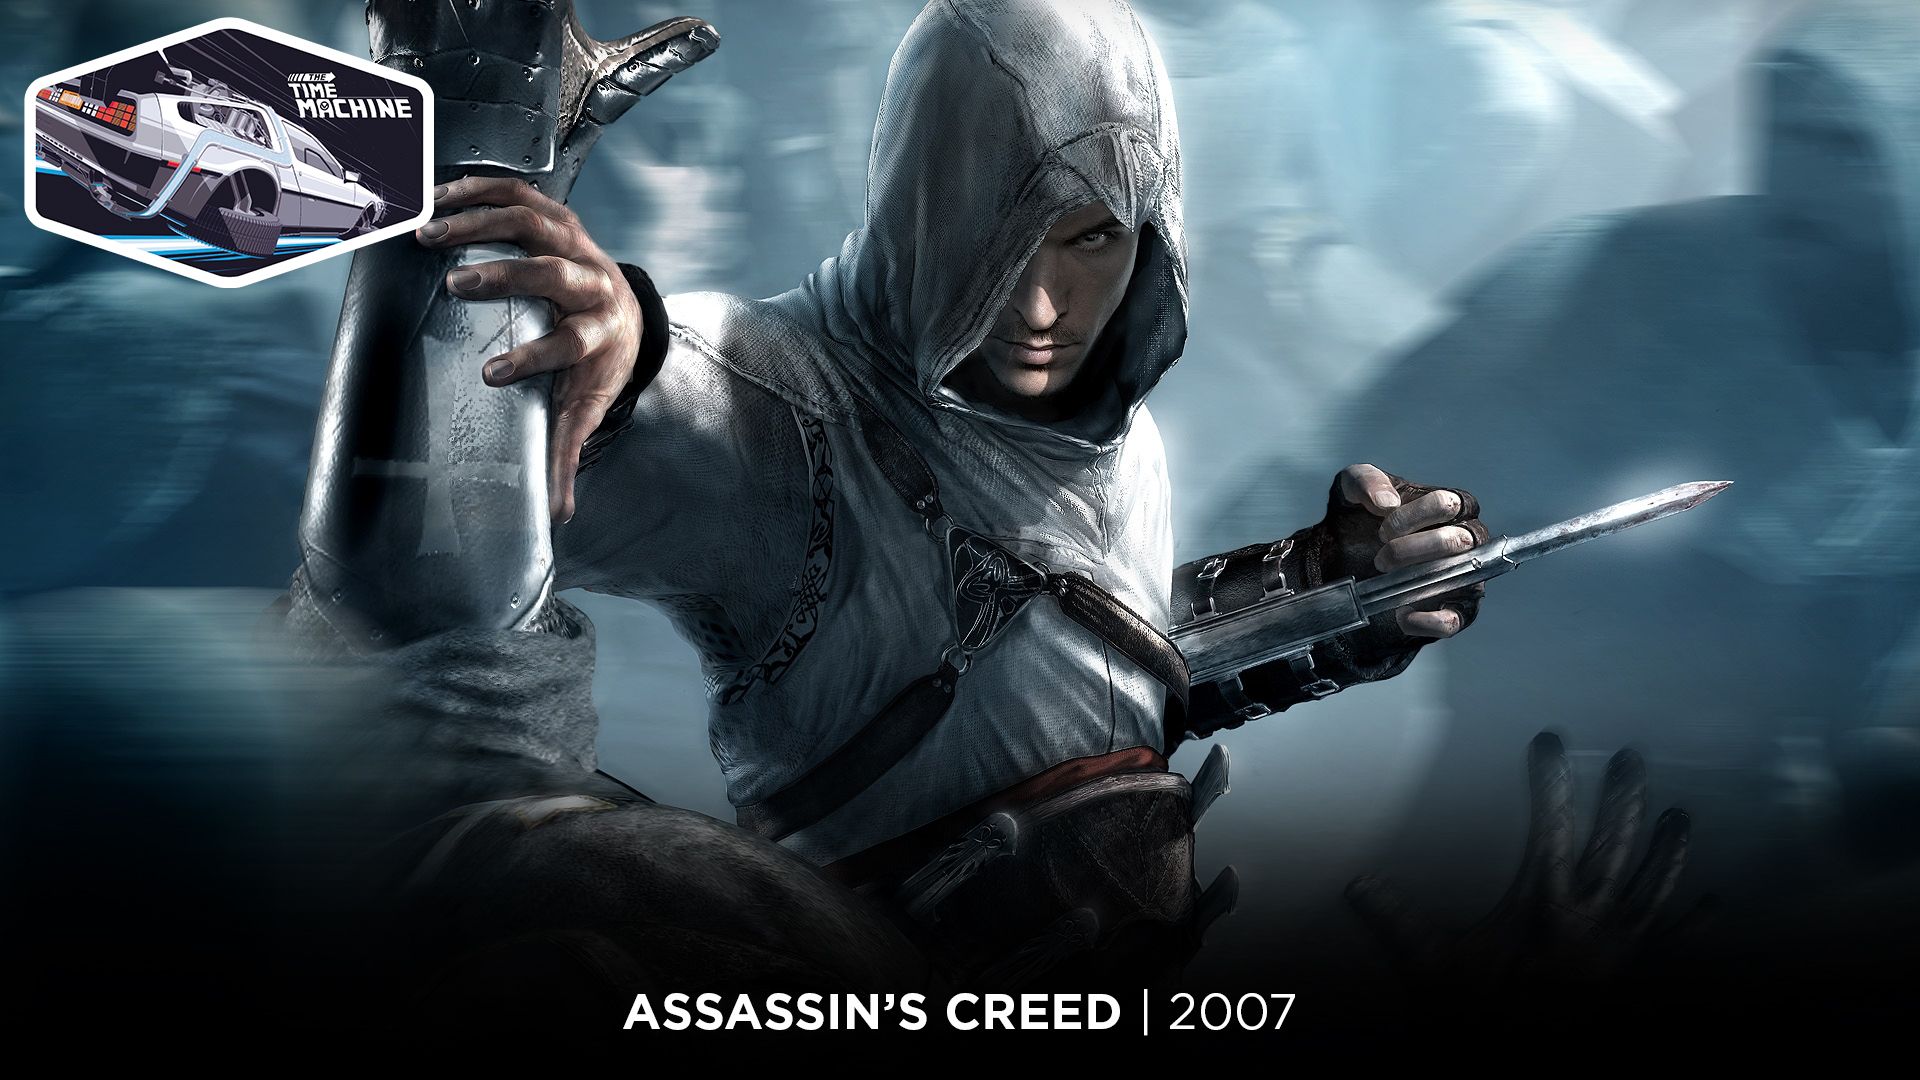 The Time Machine - Assassin's Creed